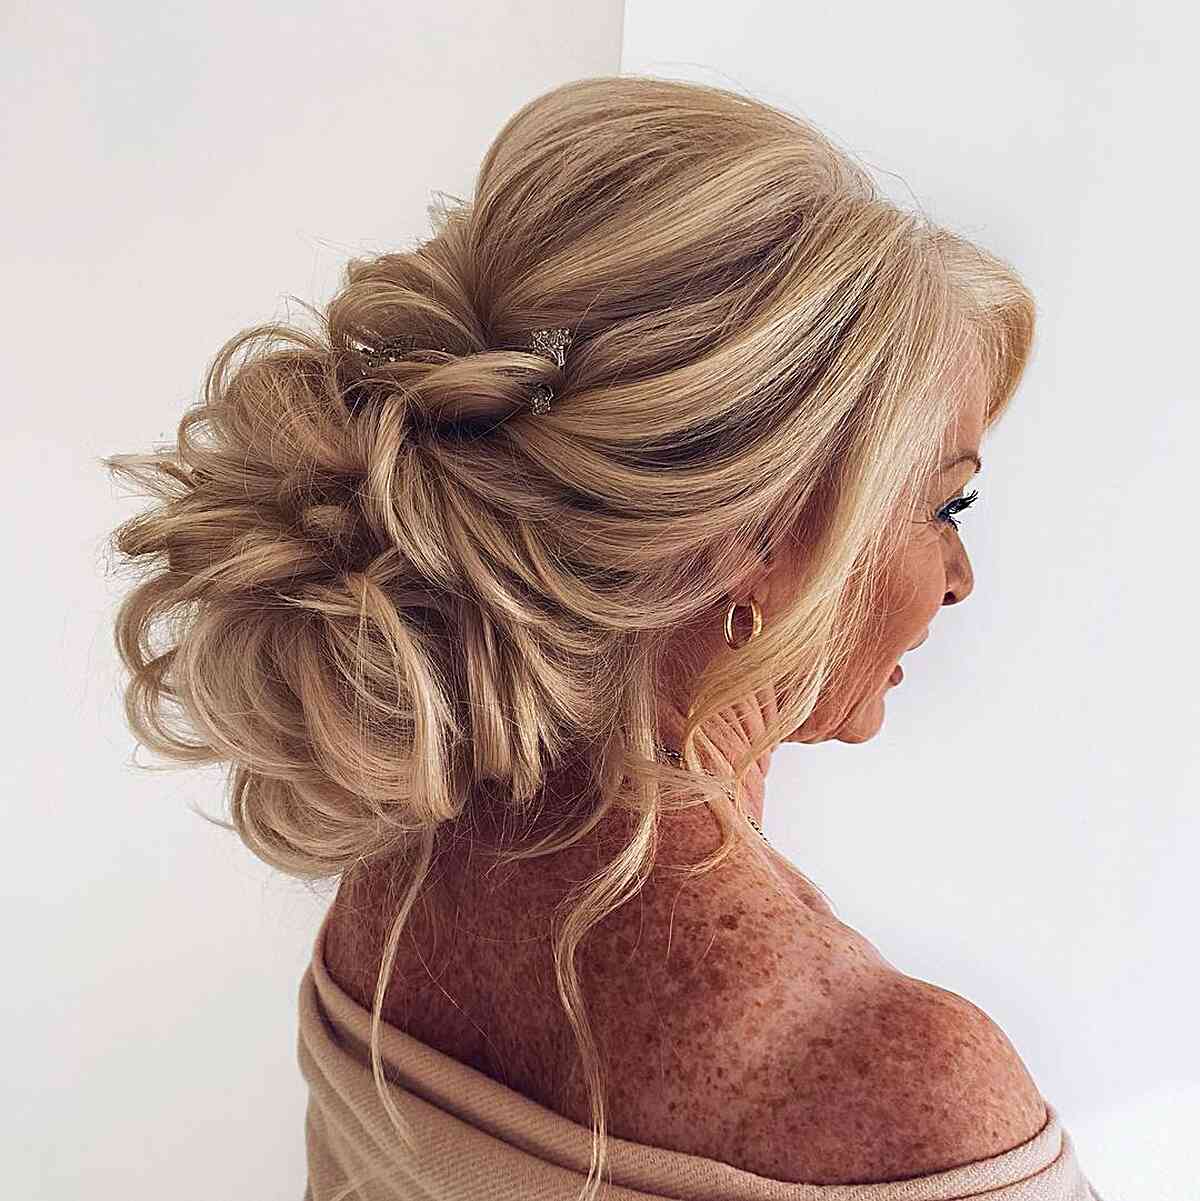 Upstyle for Long Blonde Hair and the Mother of the Groom